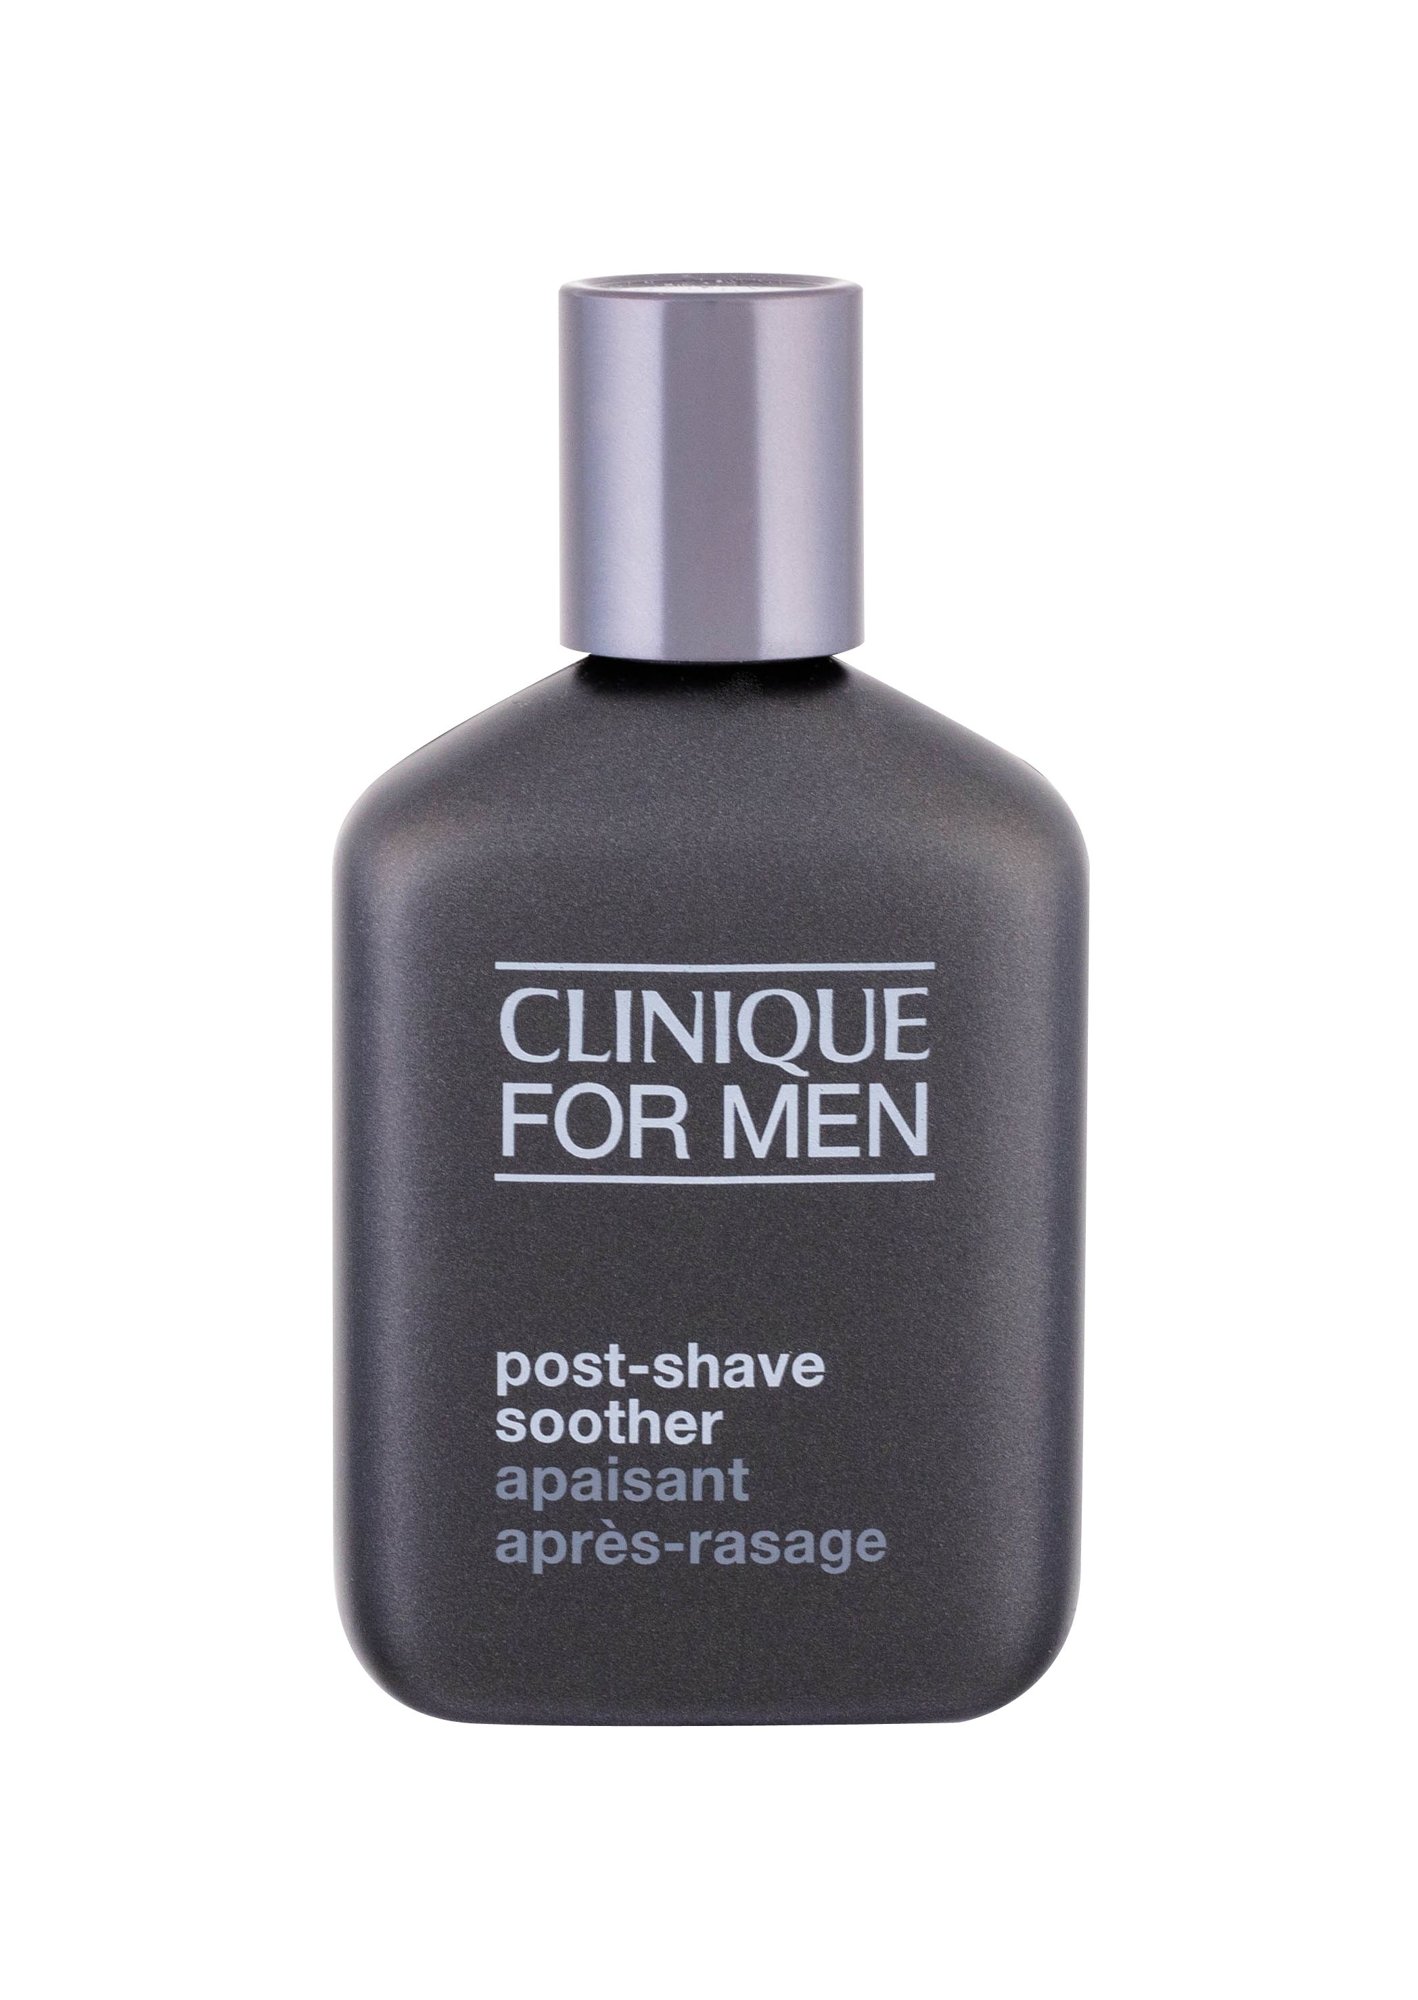 Clinique For Men Post Shave Soother 75ml balzamas po skutimosi